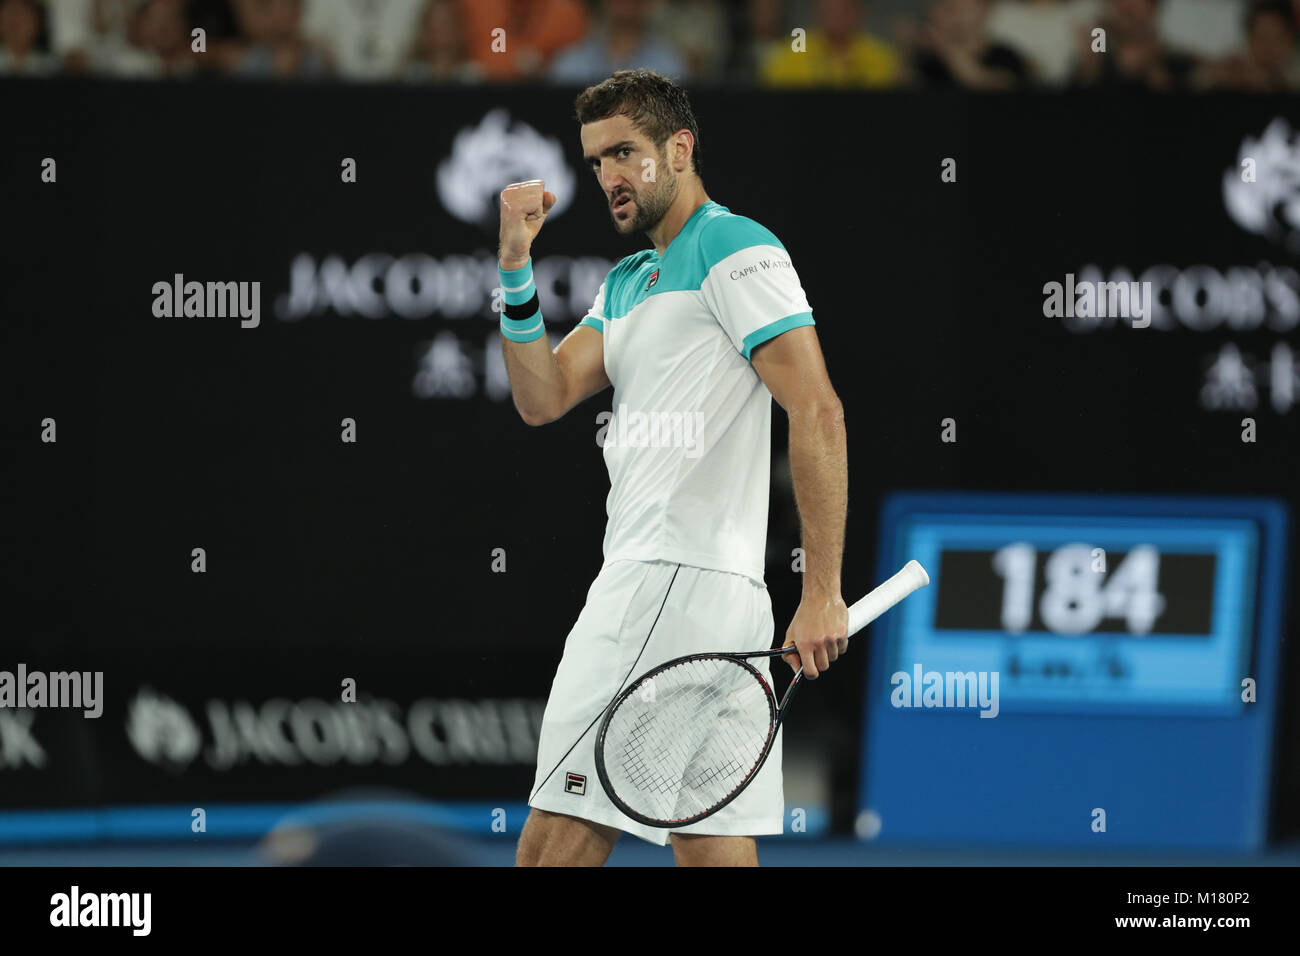 Melbourne, Australia. 28th January 2018. Bosniac tennis player Marin Cilic is in action during his finals match at the Australian Open vs Swiss tennis player Roger Federer on Jan 28, 2018 in Melbourne, Australia.- ©Yan Lerval/Alamy Live News Stock Photo